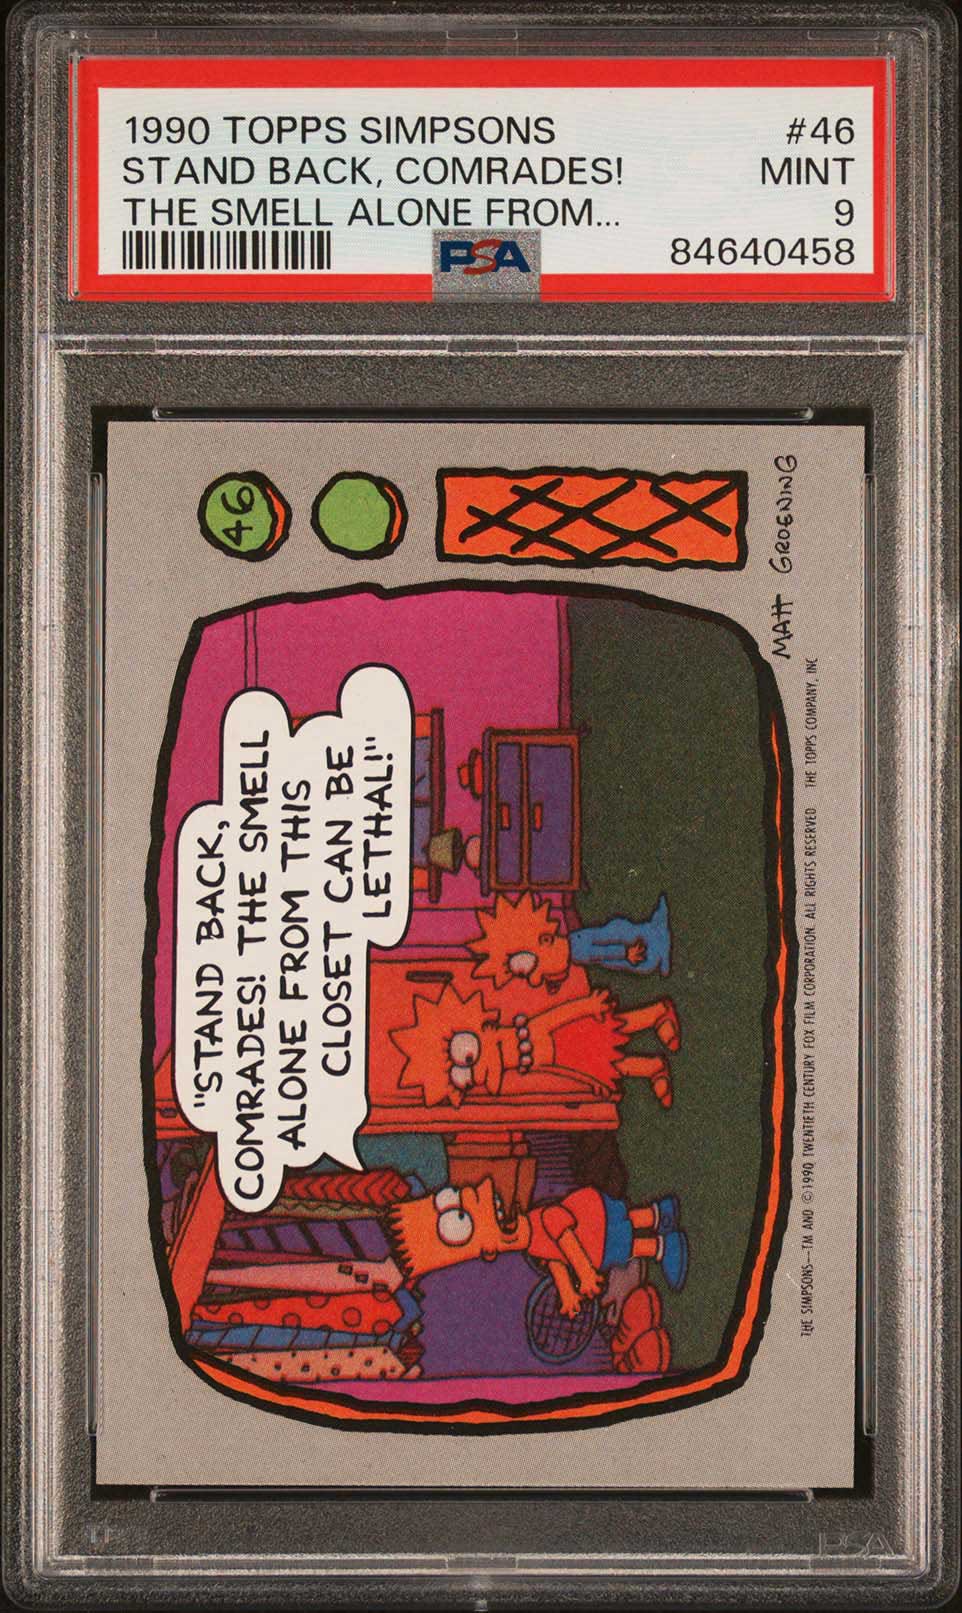 BART LISA MAGGIE PSA 9 1990 Topps The Simpsons Stand Back Comrades! #46 The Simpsons Base Graded Cards - Hobby Gems